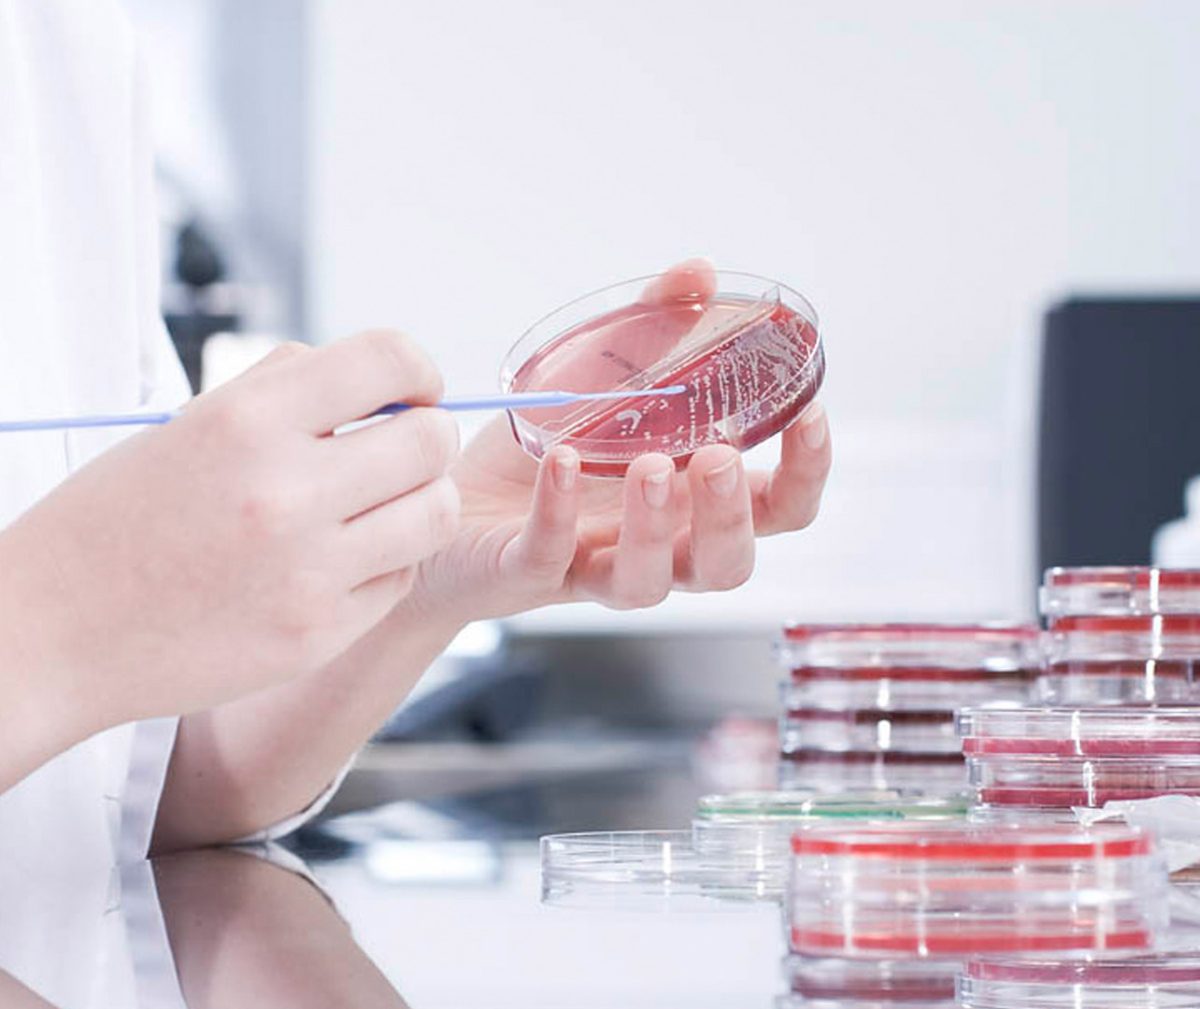 Close-up of a woman's hands probing a bacteria culture in a petri dish in a research lab. In the backgrounds, more petri dishes are visible.